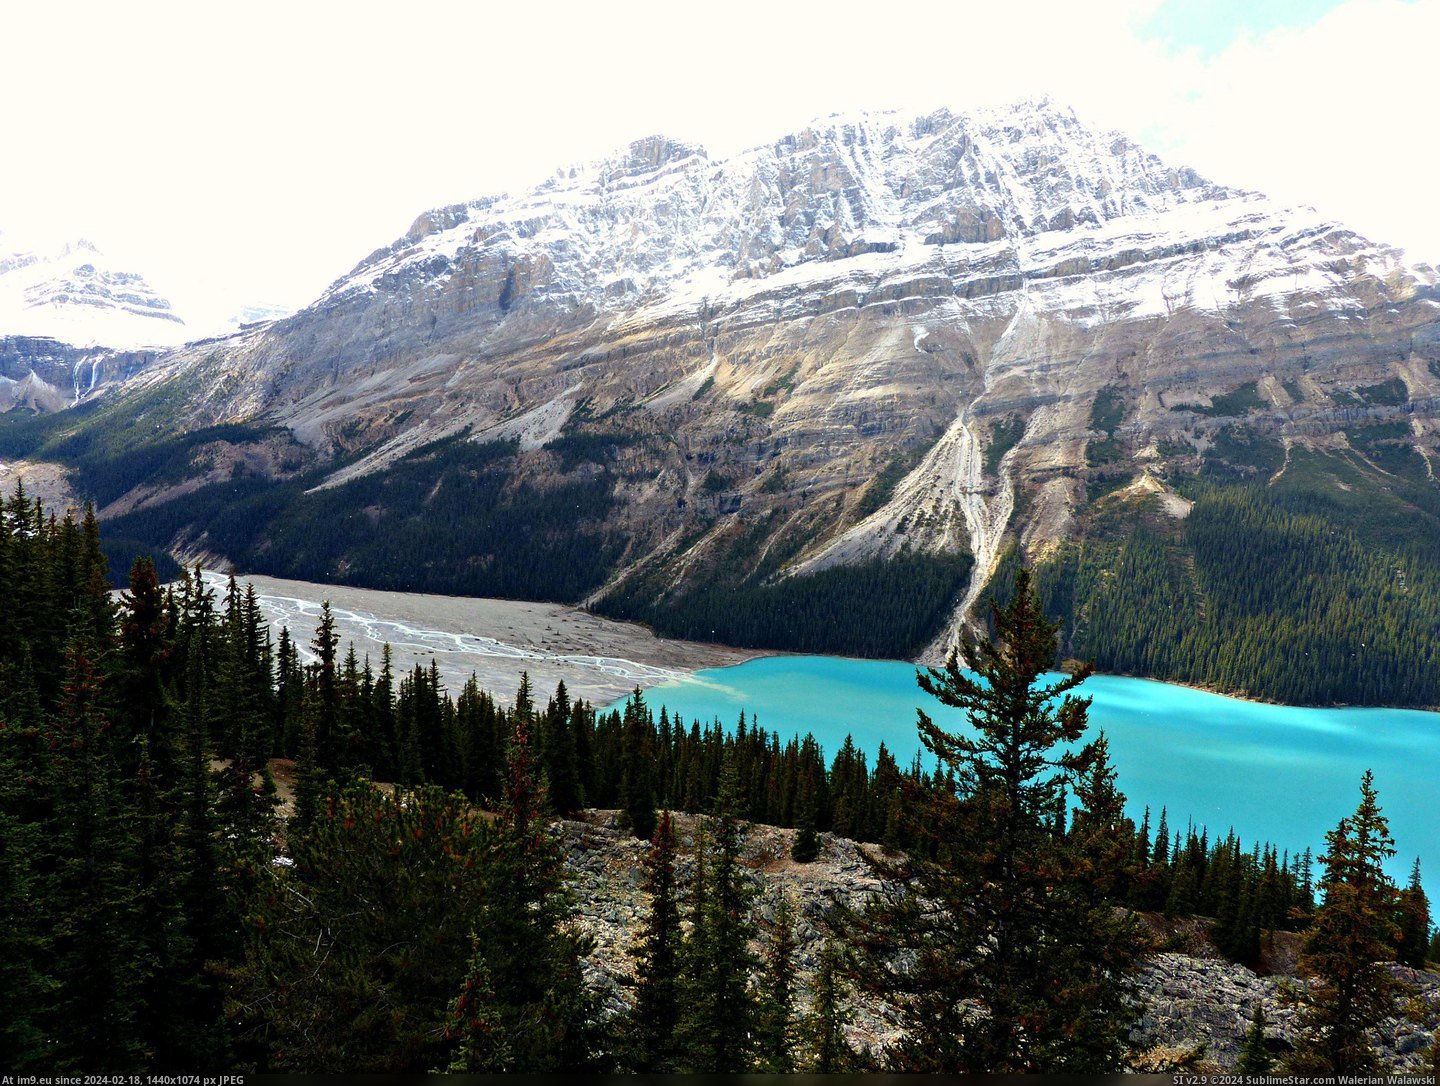 #Lake #Perfection #Peyto #Canada [Earthporn] First post! Cyan perfection at Peyto Lake, Canada [3128x2346] Pic. (Изображение из альбом My r/EARTHPORN favs))